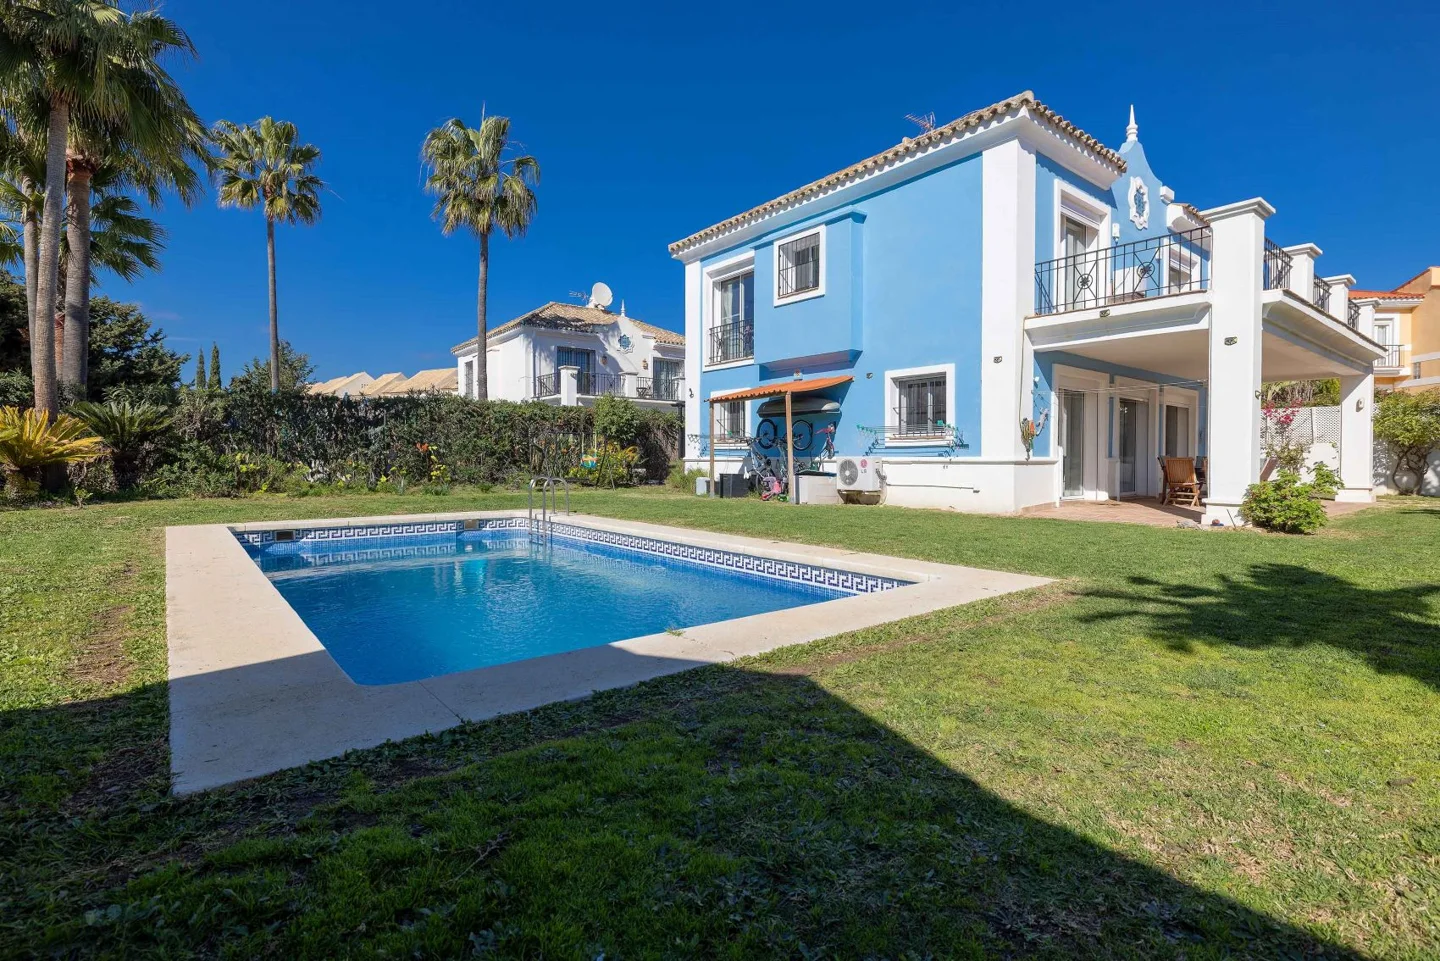 Detached villa: Your new home, a family paradise